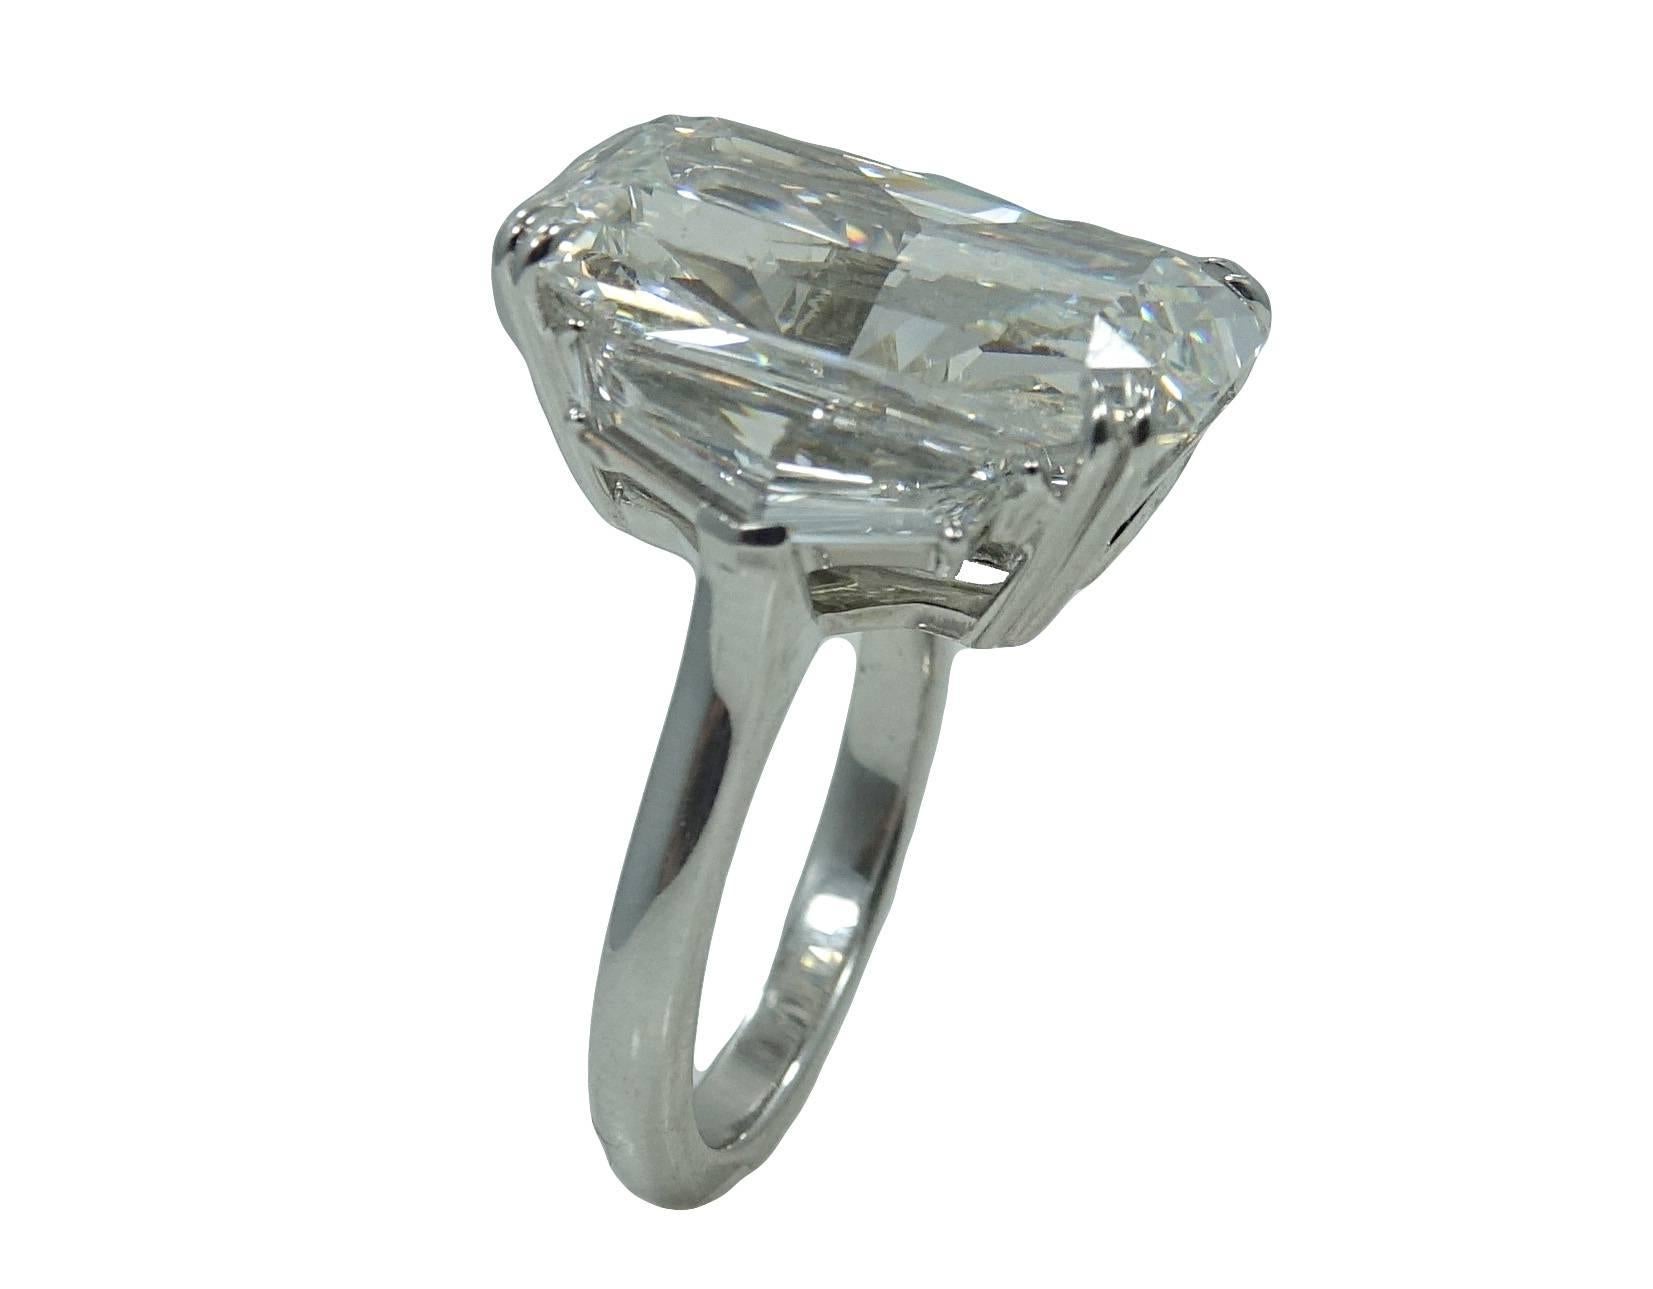 Platinum Engagement Ring With Center Enlongated Radiant Diamond Weighing A Total Carat Weight Of 15.03ct, G In Color and SI2 In Clarity (GIA Report #: 5172625179) With Two Special Long Cut Caddy Trap Diamonds Weighing A Total Carat Weight Of 1.55ct.